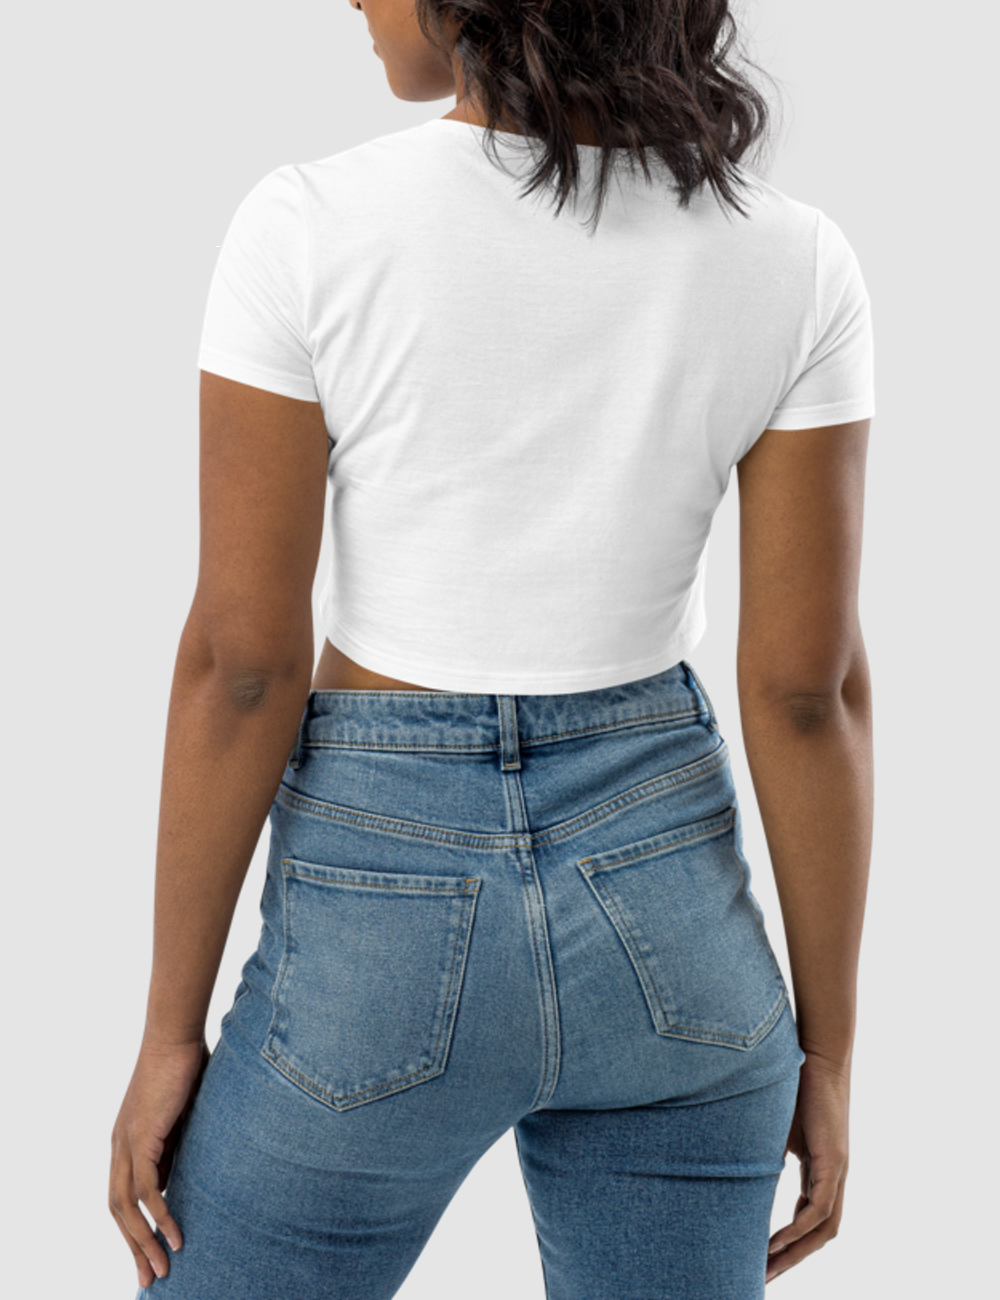 Just Don't Talk To Me At All | Women's Crop Top T-Shirt OniTakai